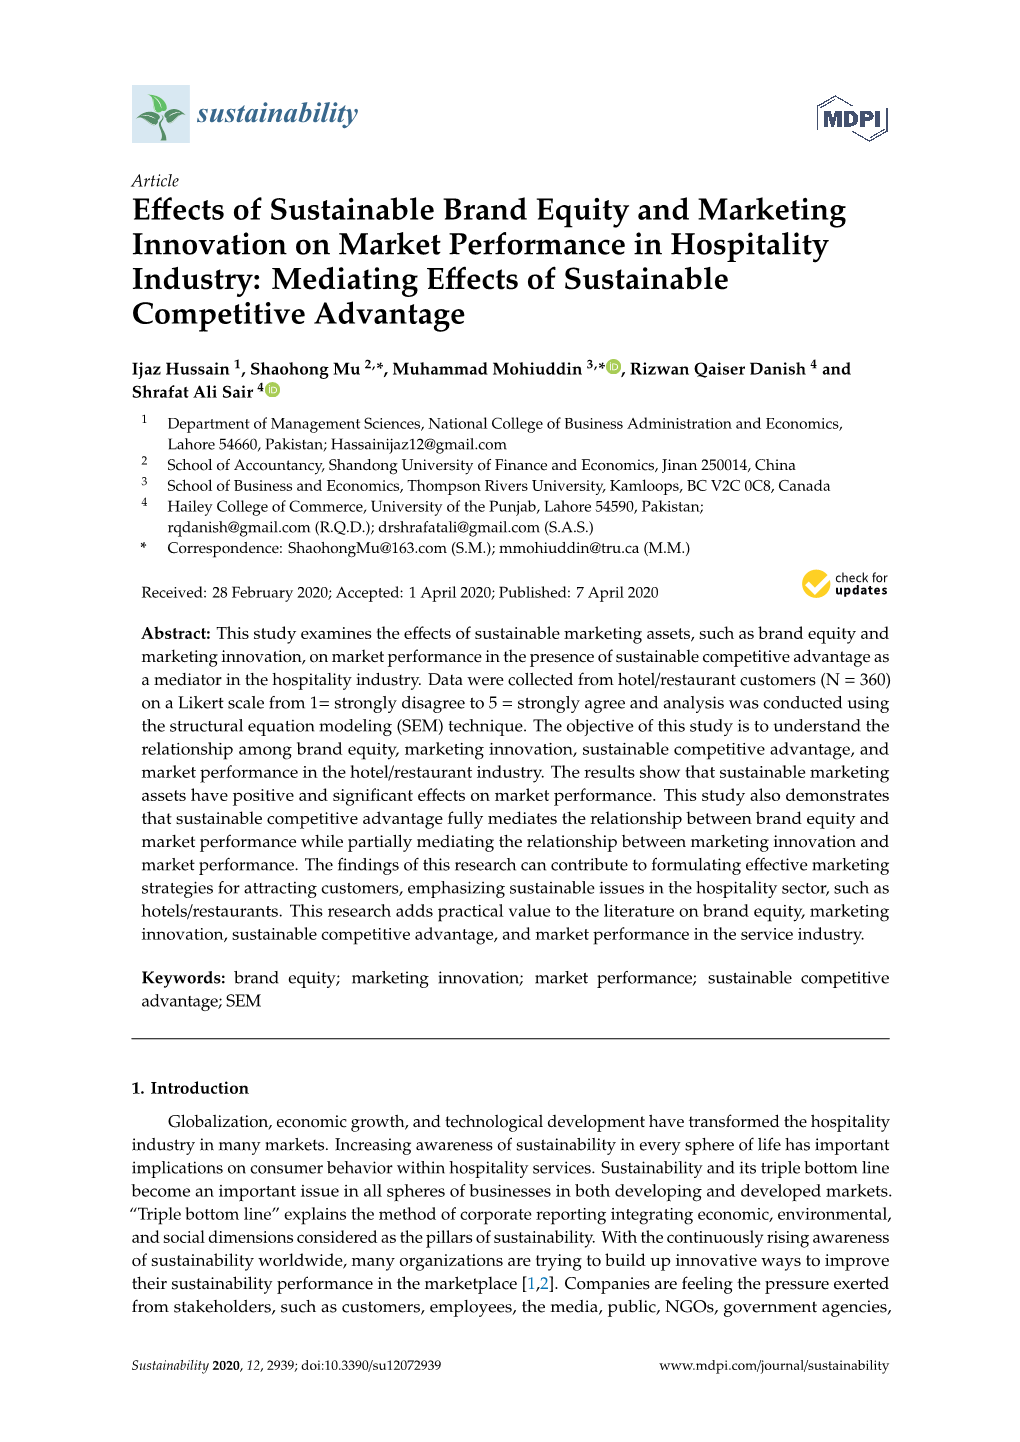 Effects of Sustainable Brand Equity and Marketing Innovation on Market Performance in Hospitality Industry